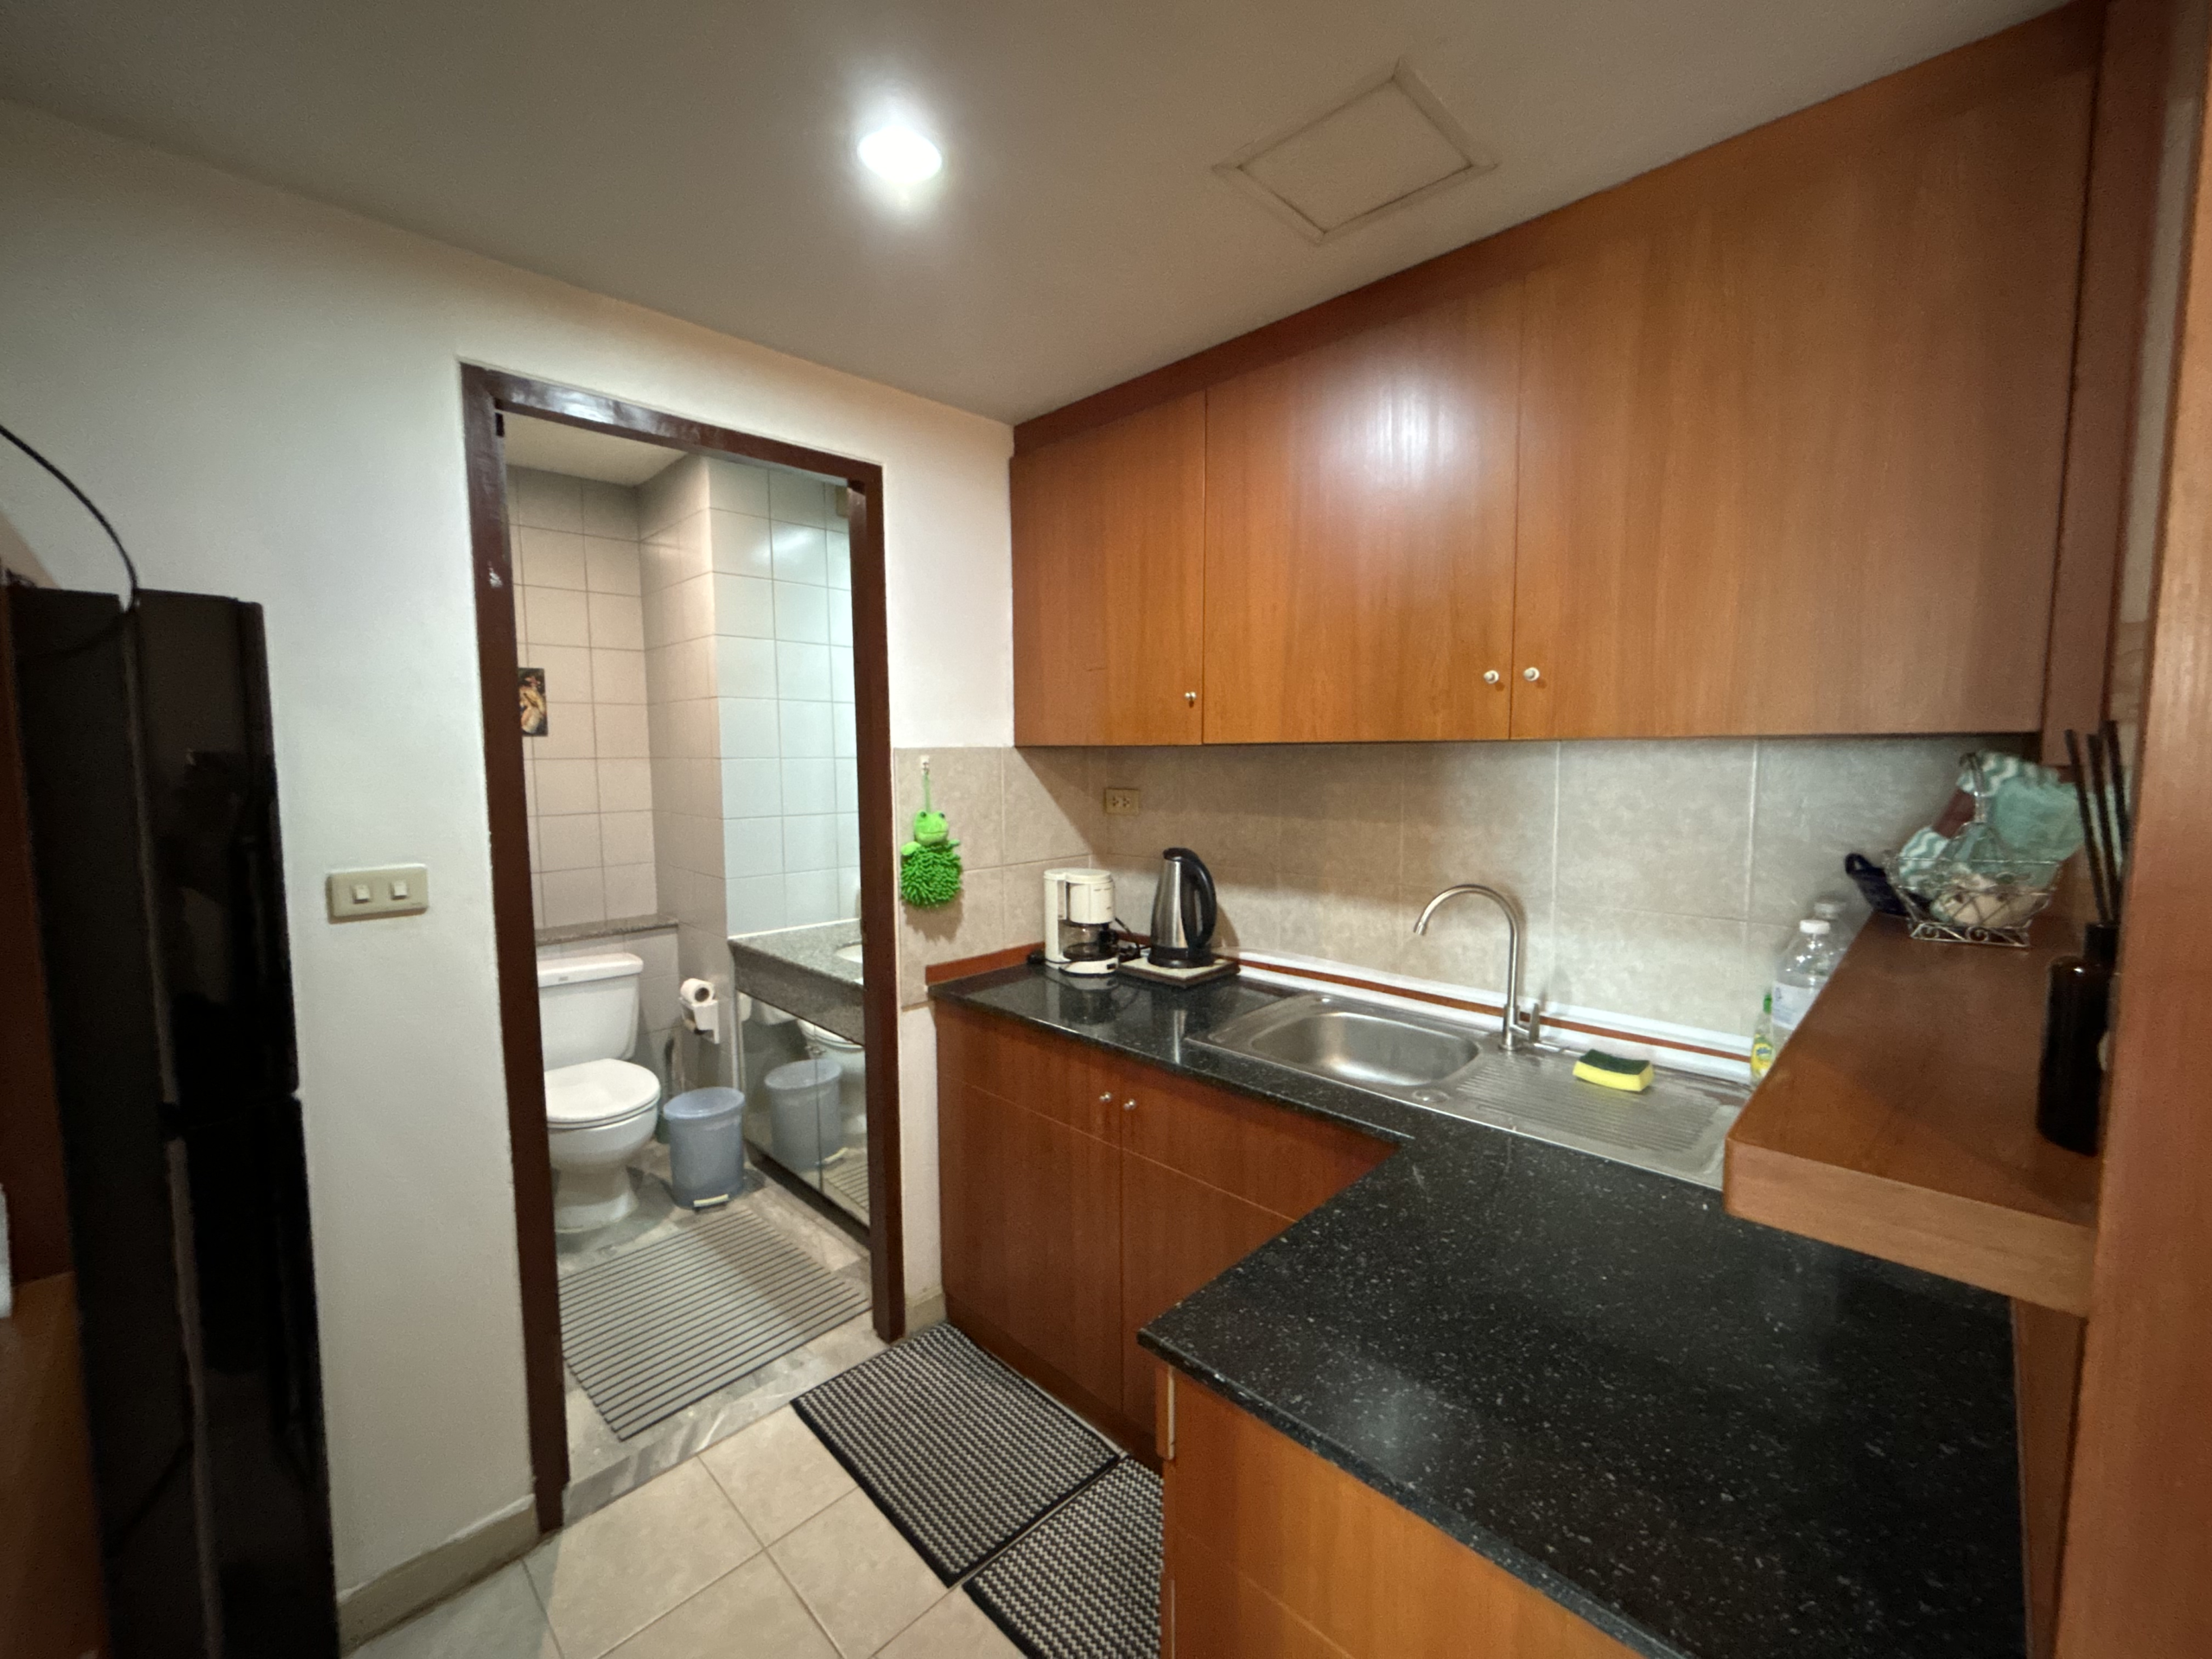 Noble House Phayathai, 1 Bedroom, 18th Floor, 47 Sqm, Sale at 5,000,000.- Rent: 16,000.-